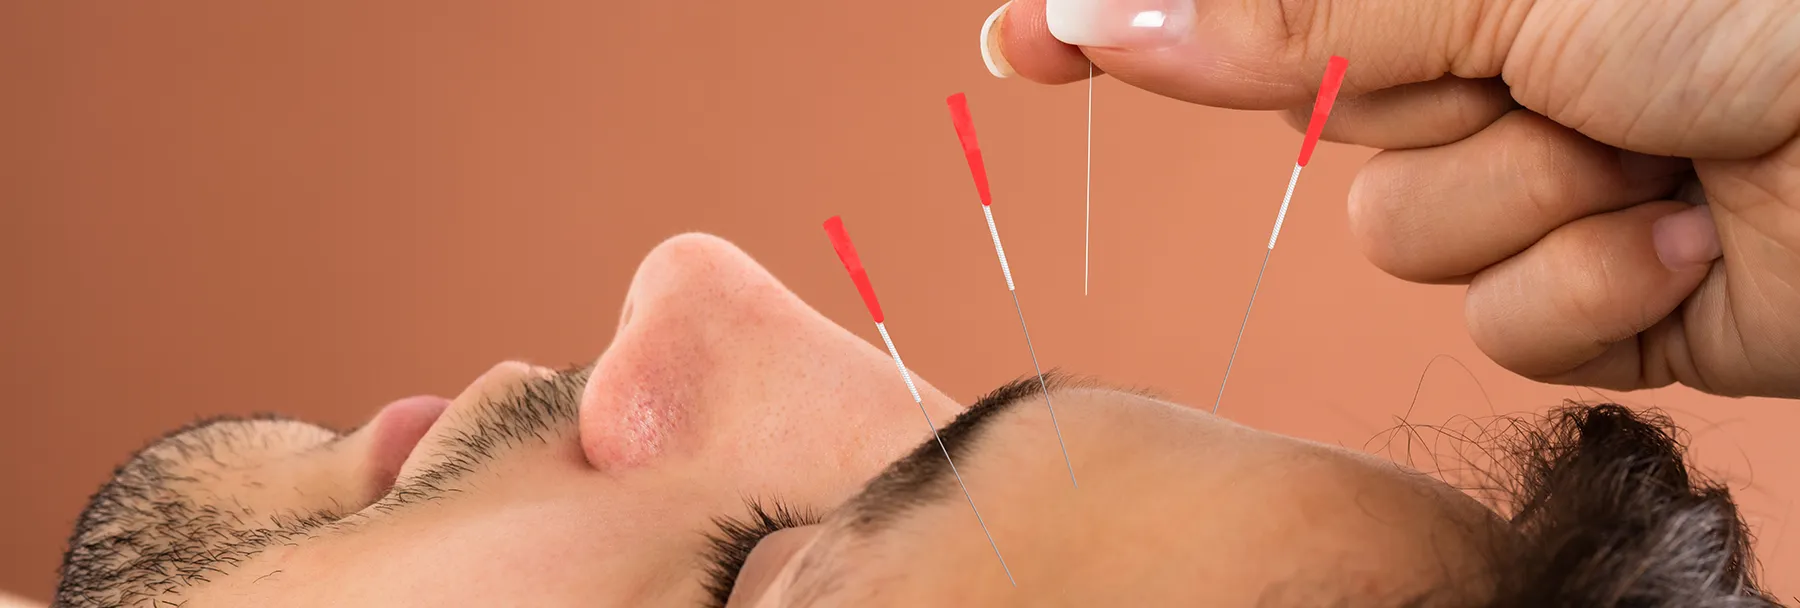 Close up of man receiving acupuncture on his face